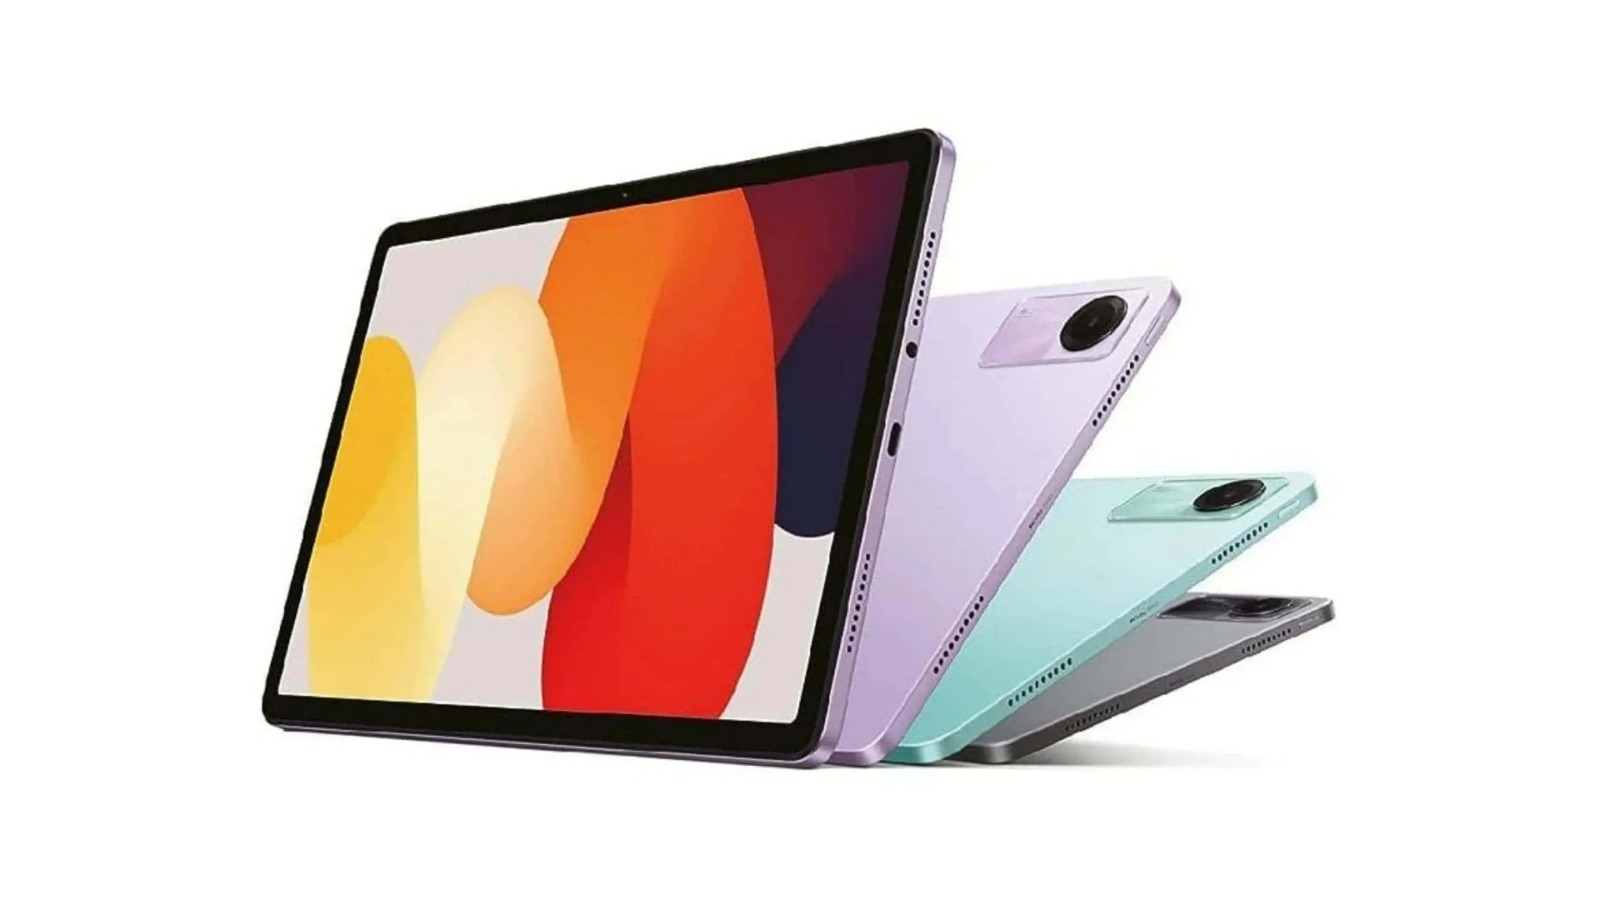 Xiaomi launched an affordable and durable tablet